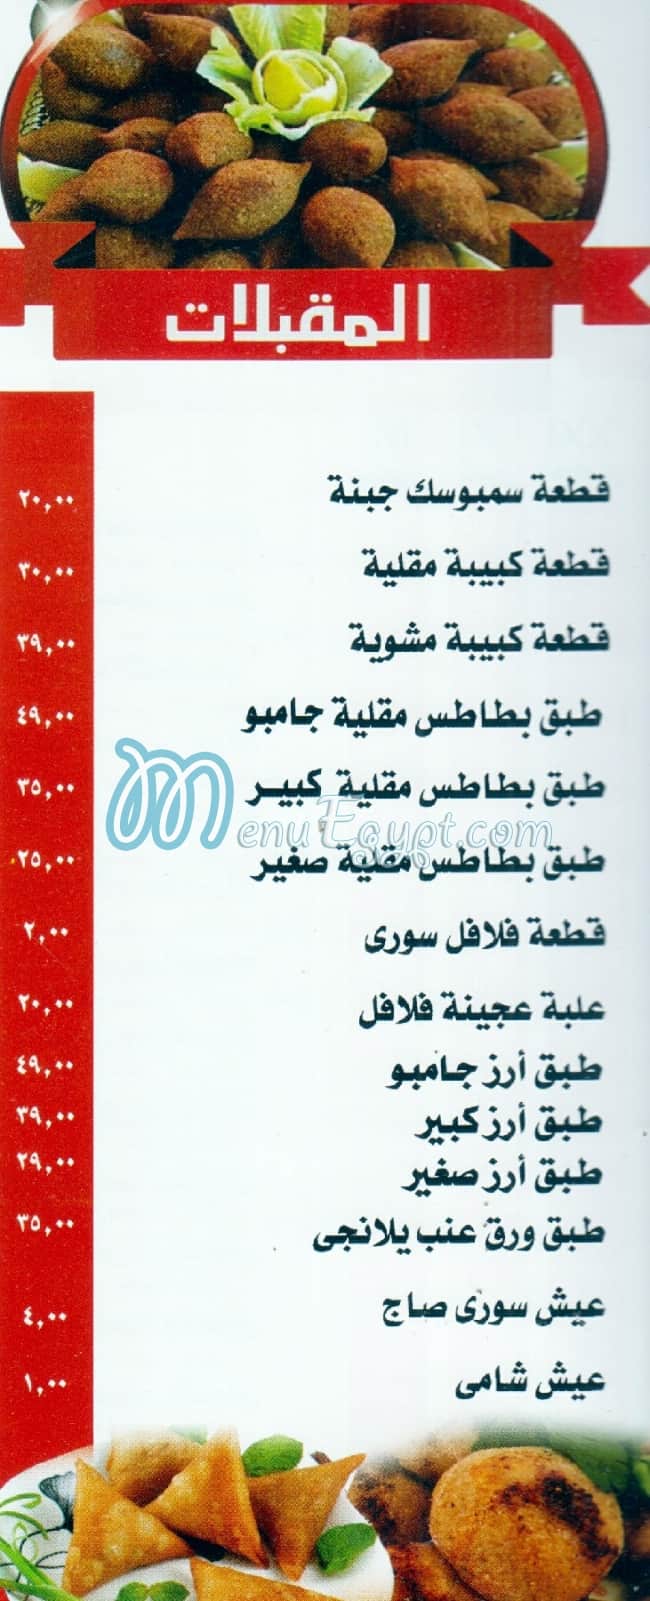 Abou Hussein Elsoury menu prices